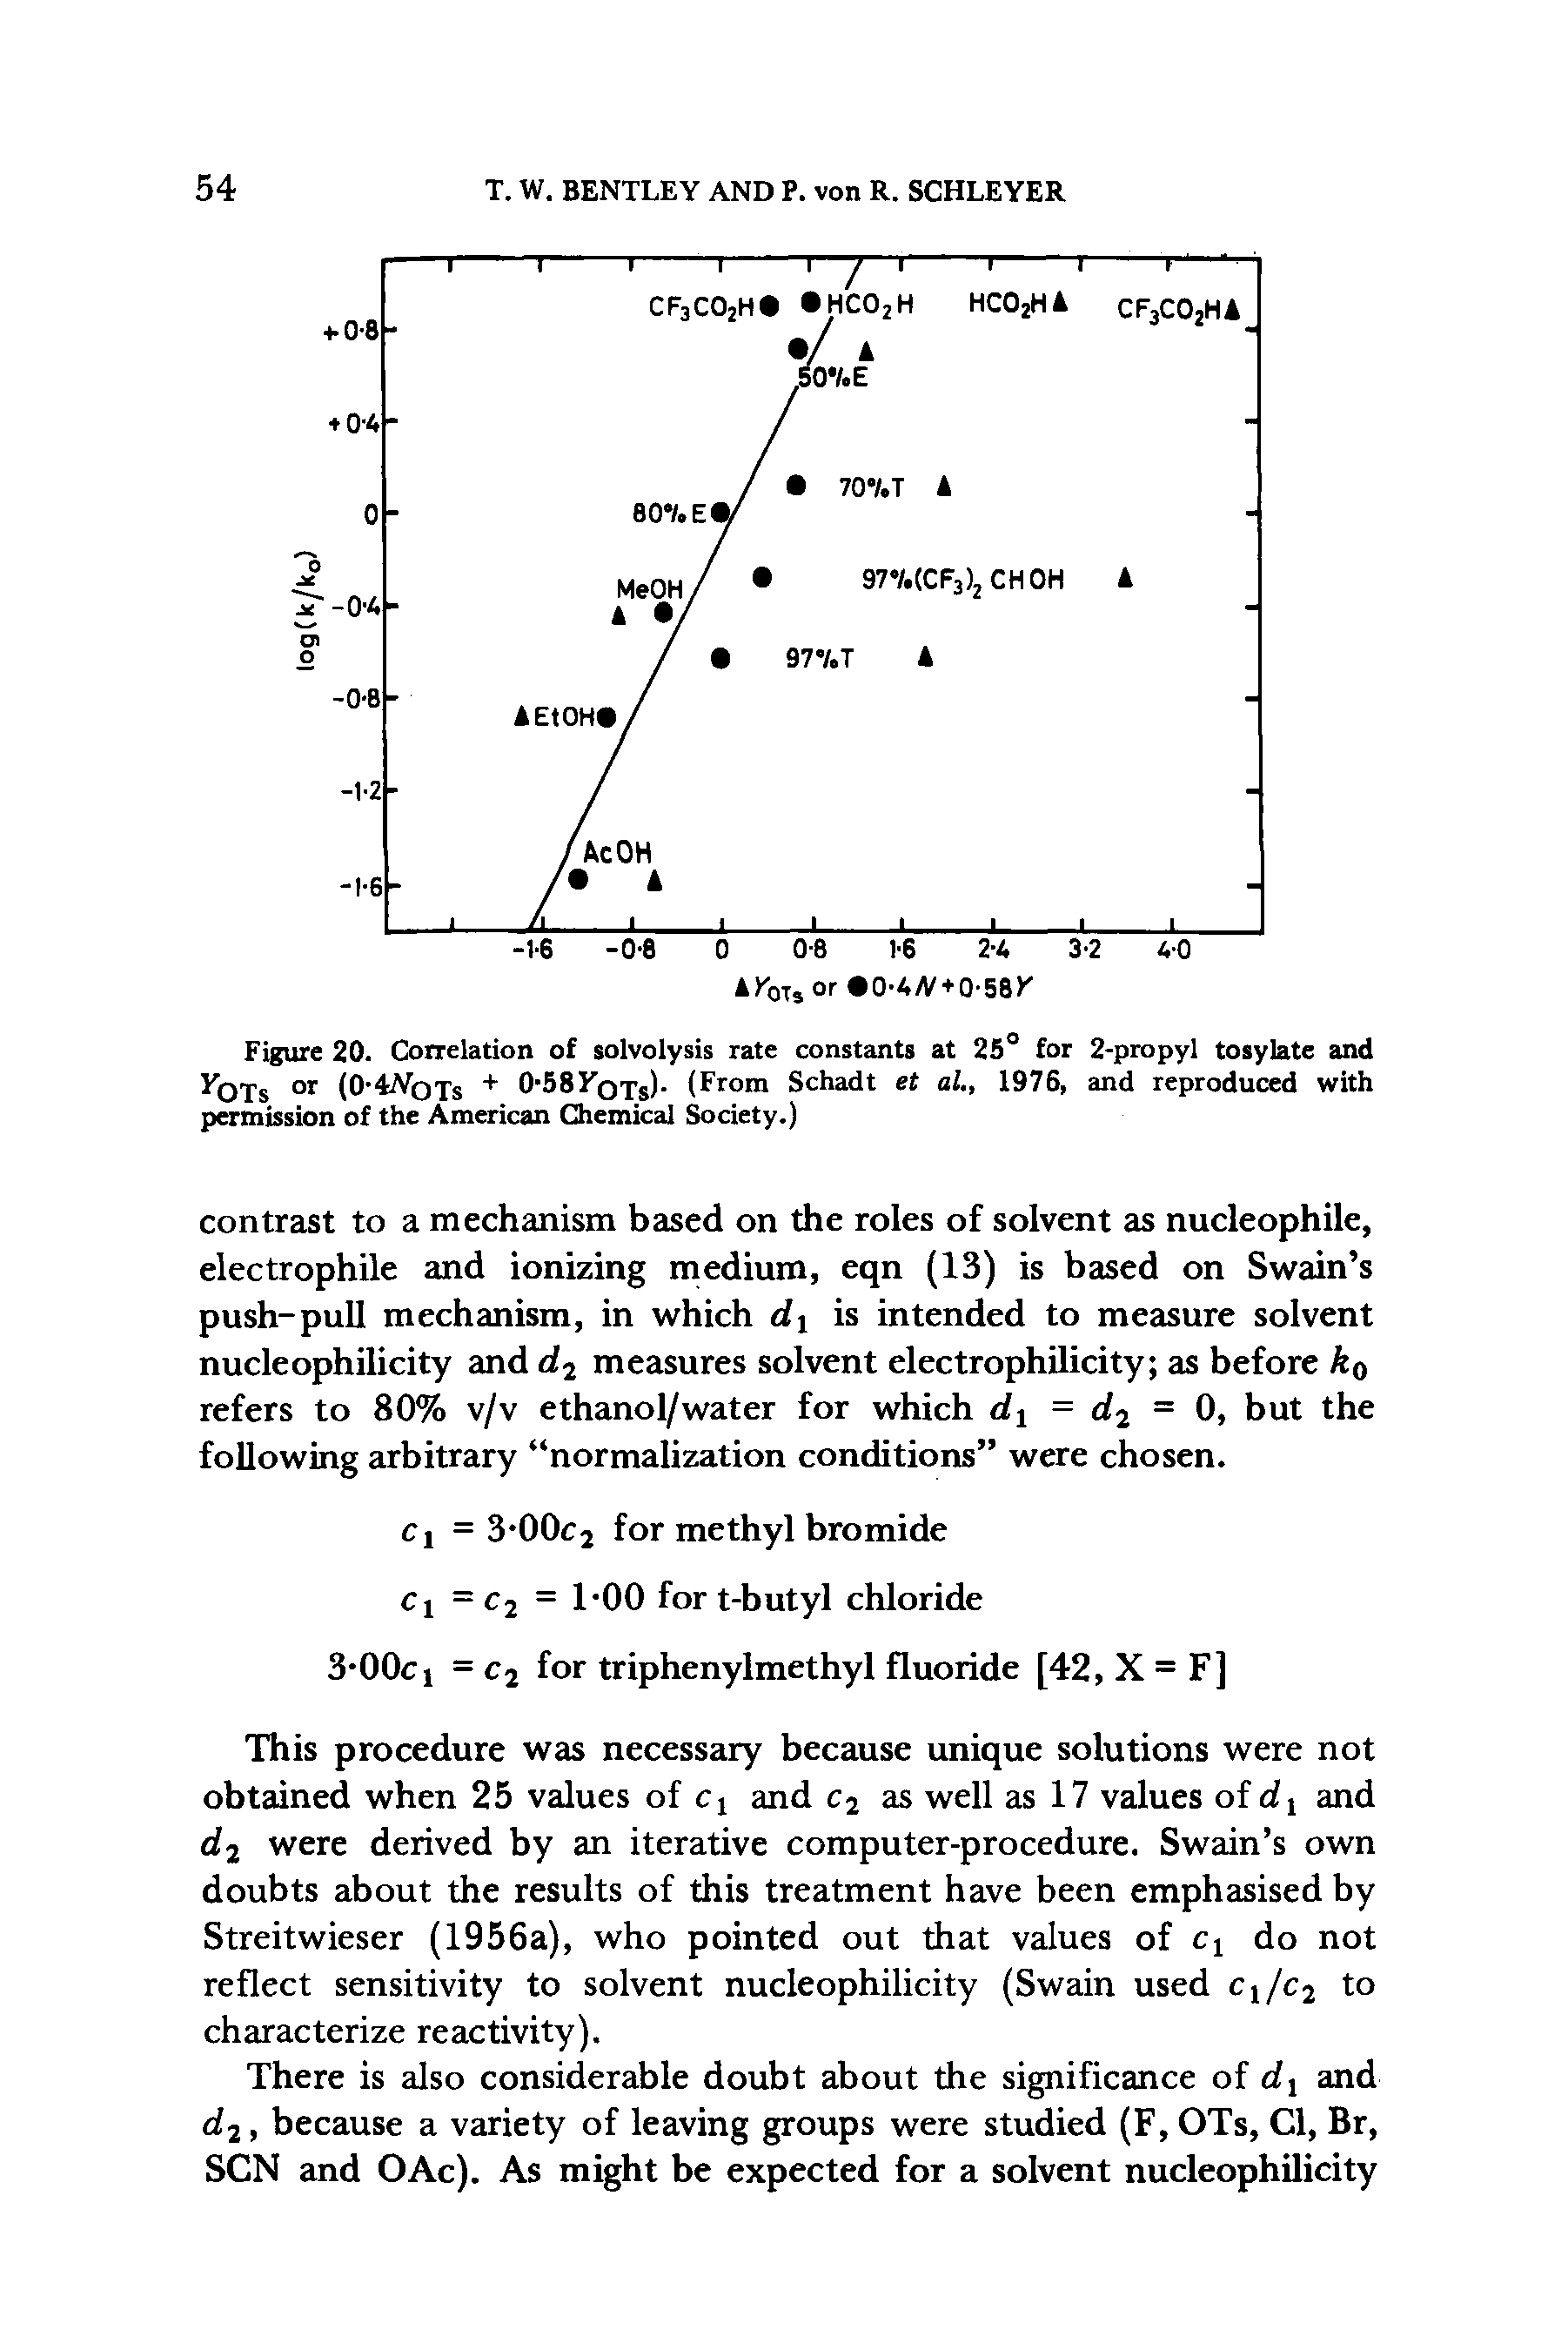 Figure 20. Correlation of solvolysis rate constants at 25° for 2-propyl tosylate and yOTs or (0 4Noxs + 0-58YoTs)- (From Schadt et al., 1976, and reproduced with permission of the American Chemical Society.)...